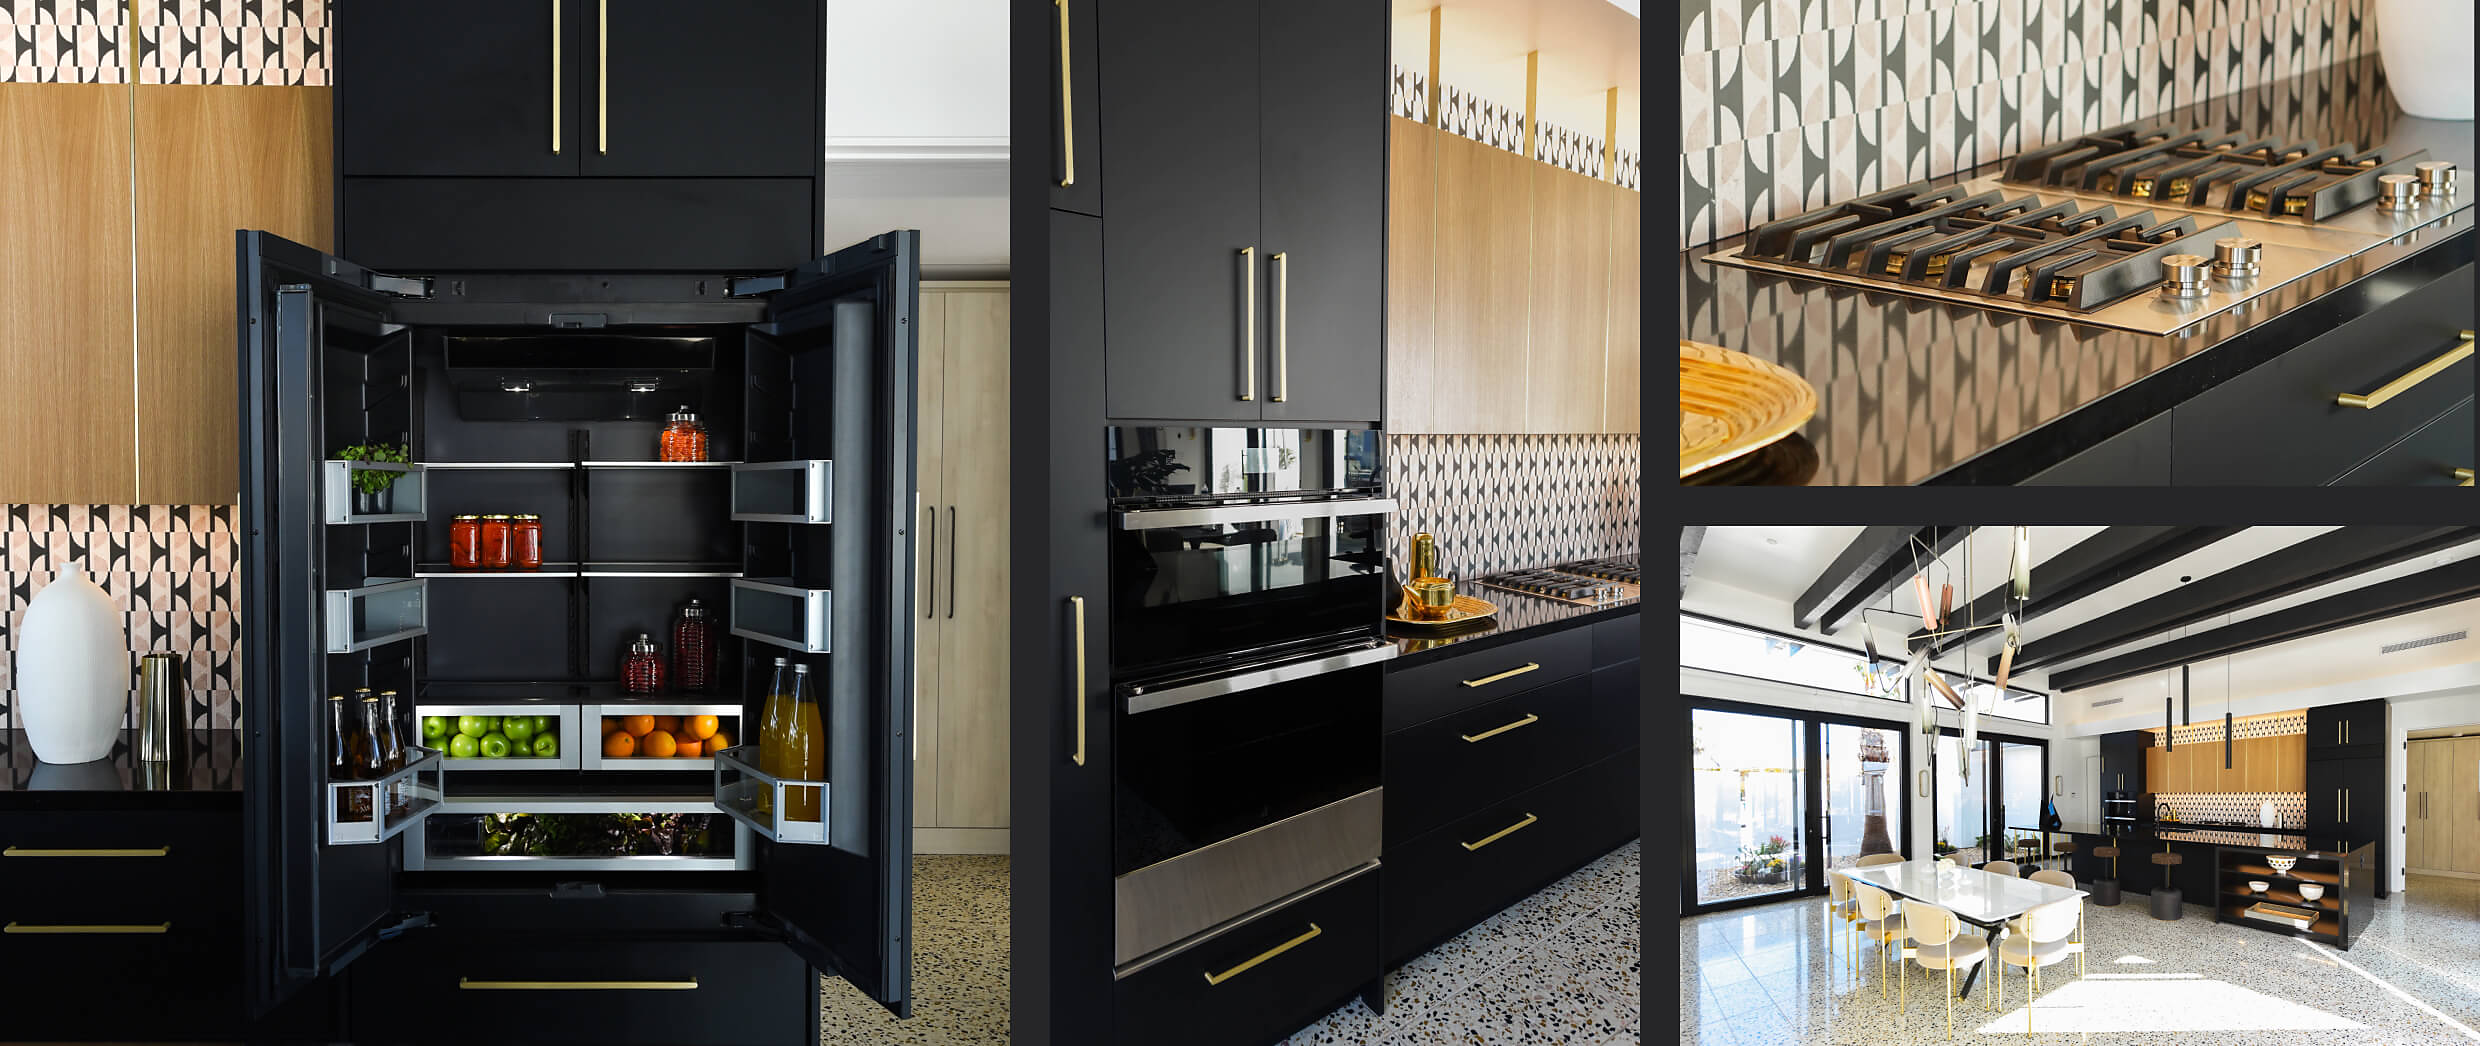 A collage of images including an open JennAir® French door built-in refrigerator fitted with black panels to match the surrounding cabinetry; a NOIR™ combination microwave wall oven installed in a bank of cabinets; a pair of 2-burner gas custom cooktops with a 4-inch downdraft strip installed in the center; a view of the entire kitchen and dining room from a distance.